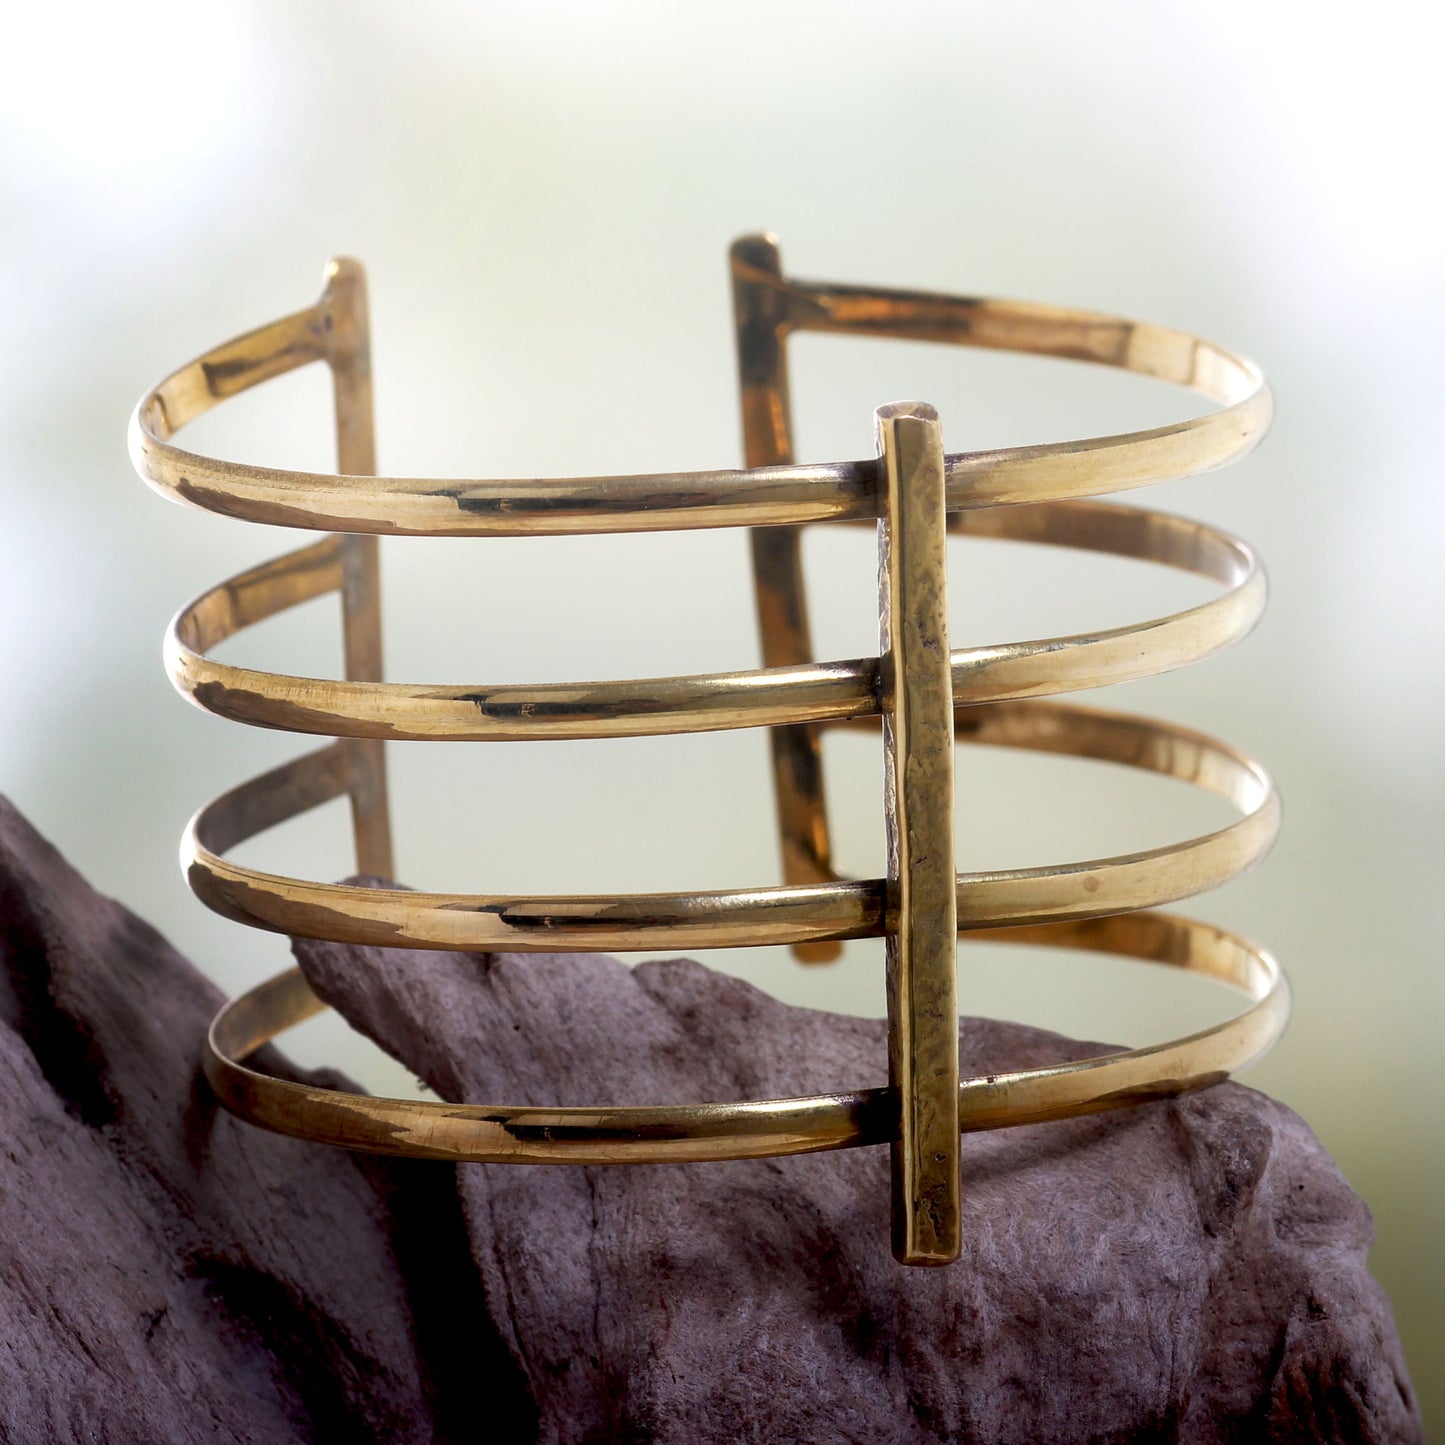 Tribal Urban Wide Cuff Bracelet Crafted by Hand of Brass in Bali